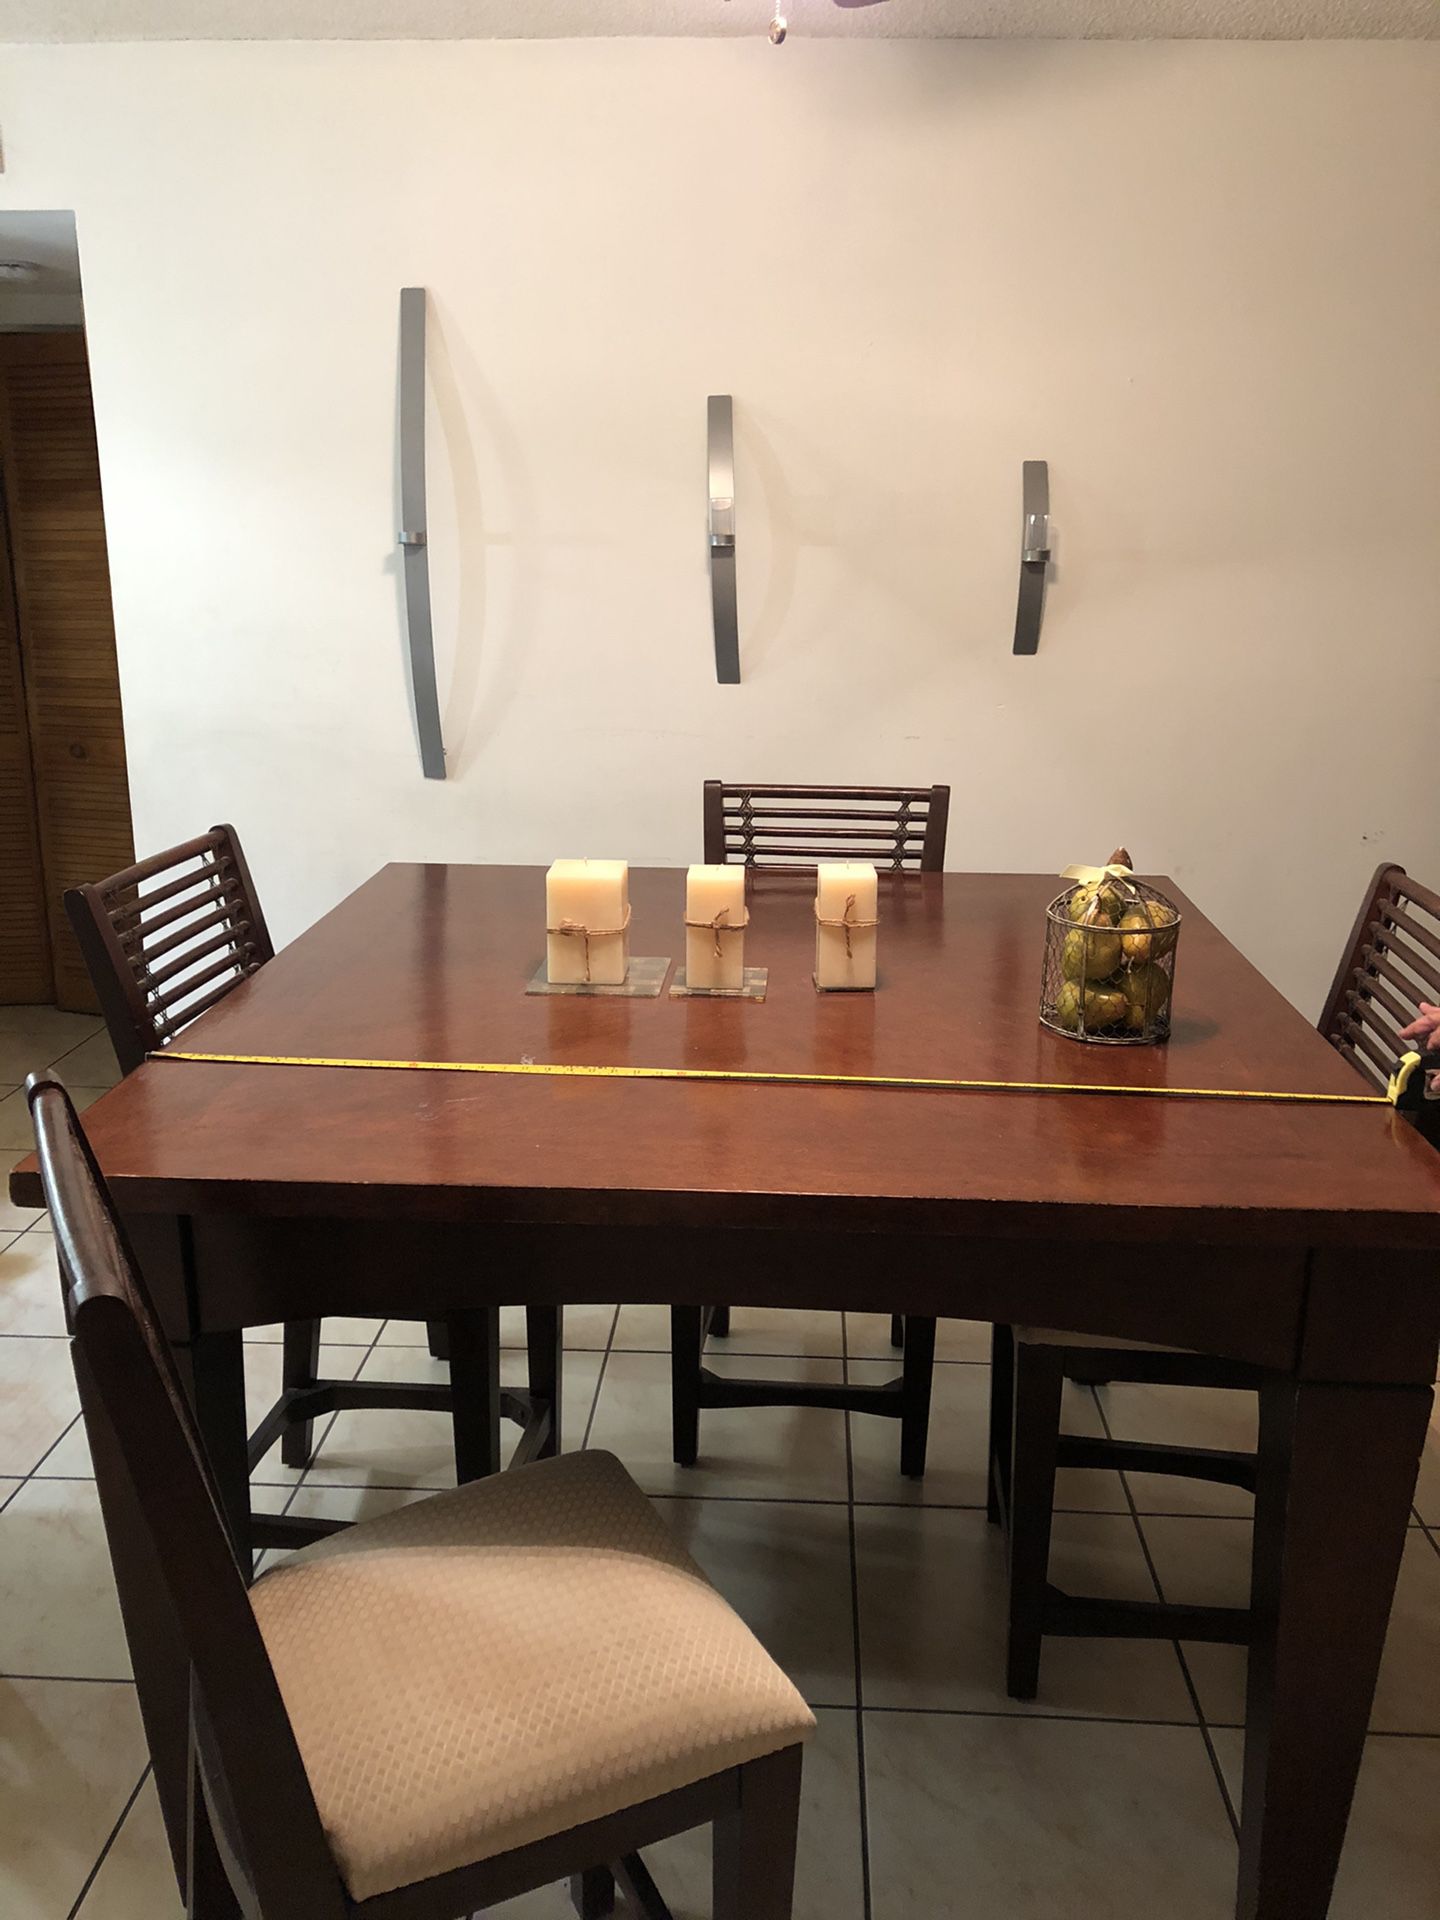 Kitchen set table moving sale must to go!!!